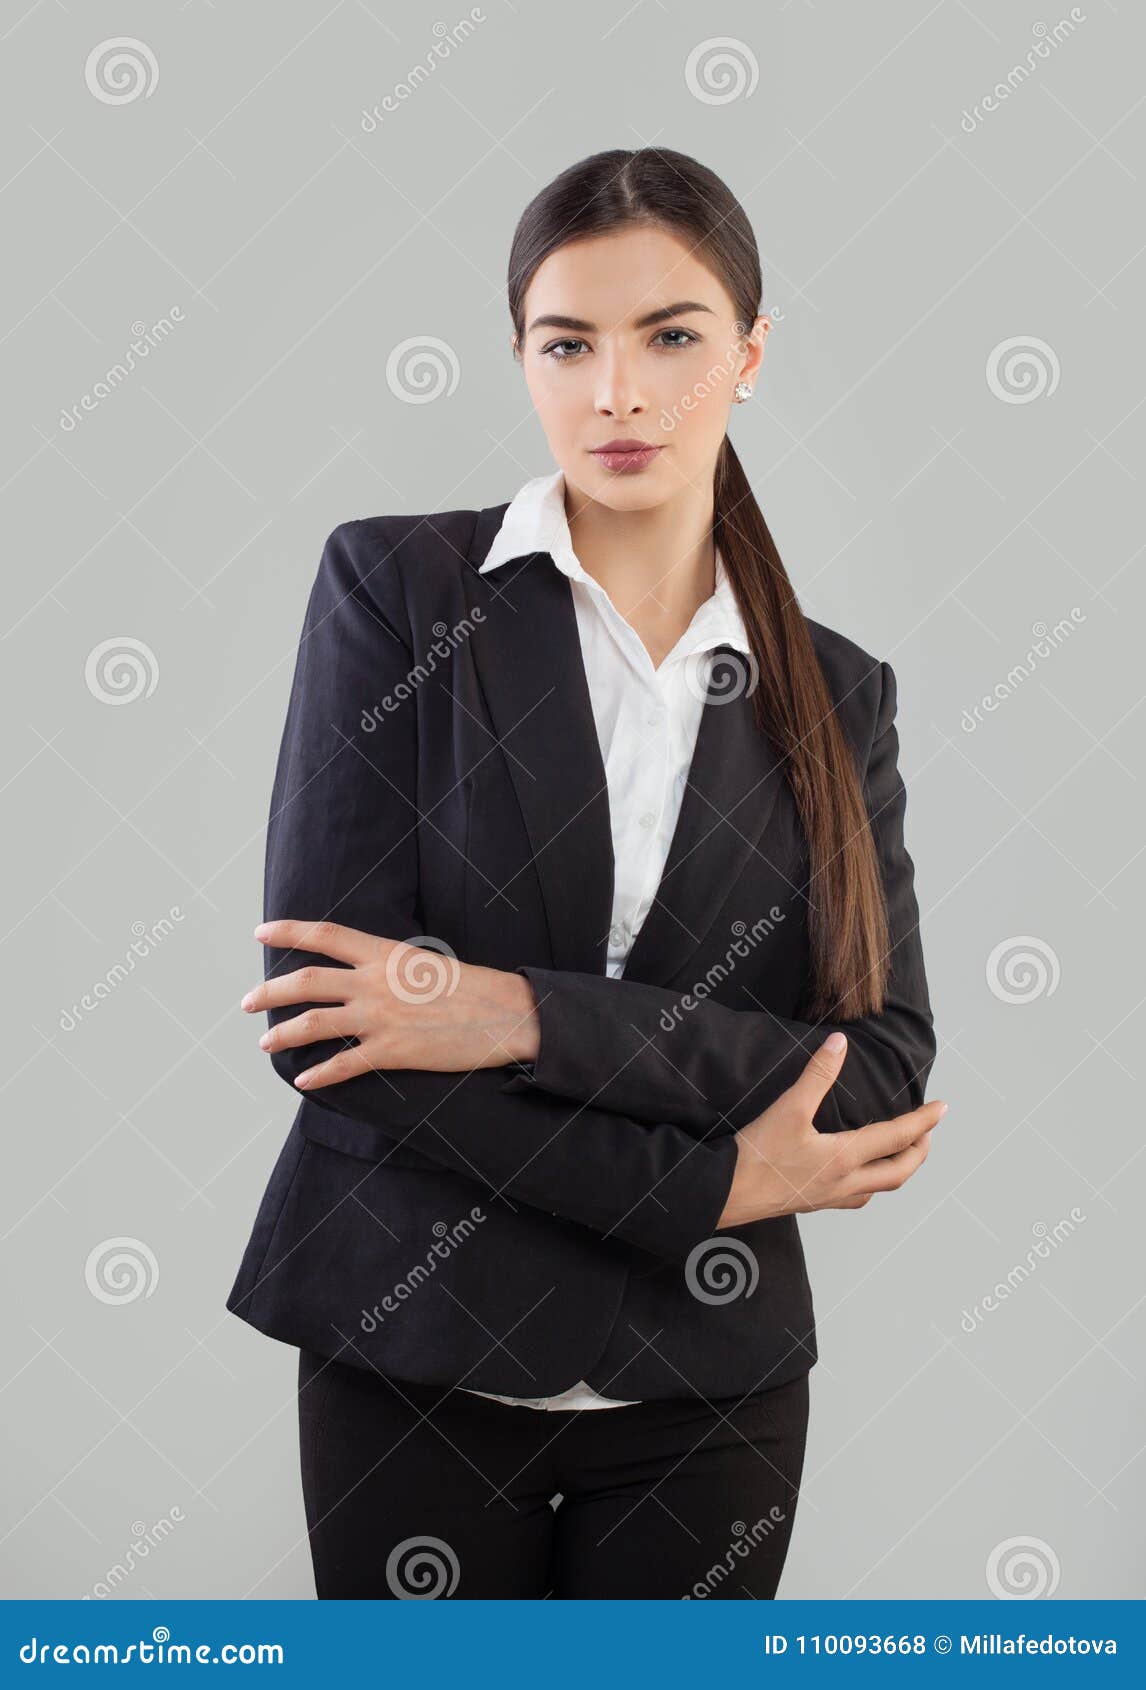 Confident Business Woman in Suit on Gray Stock Photo - Image of ...